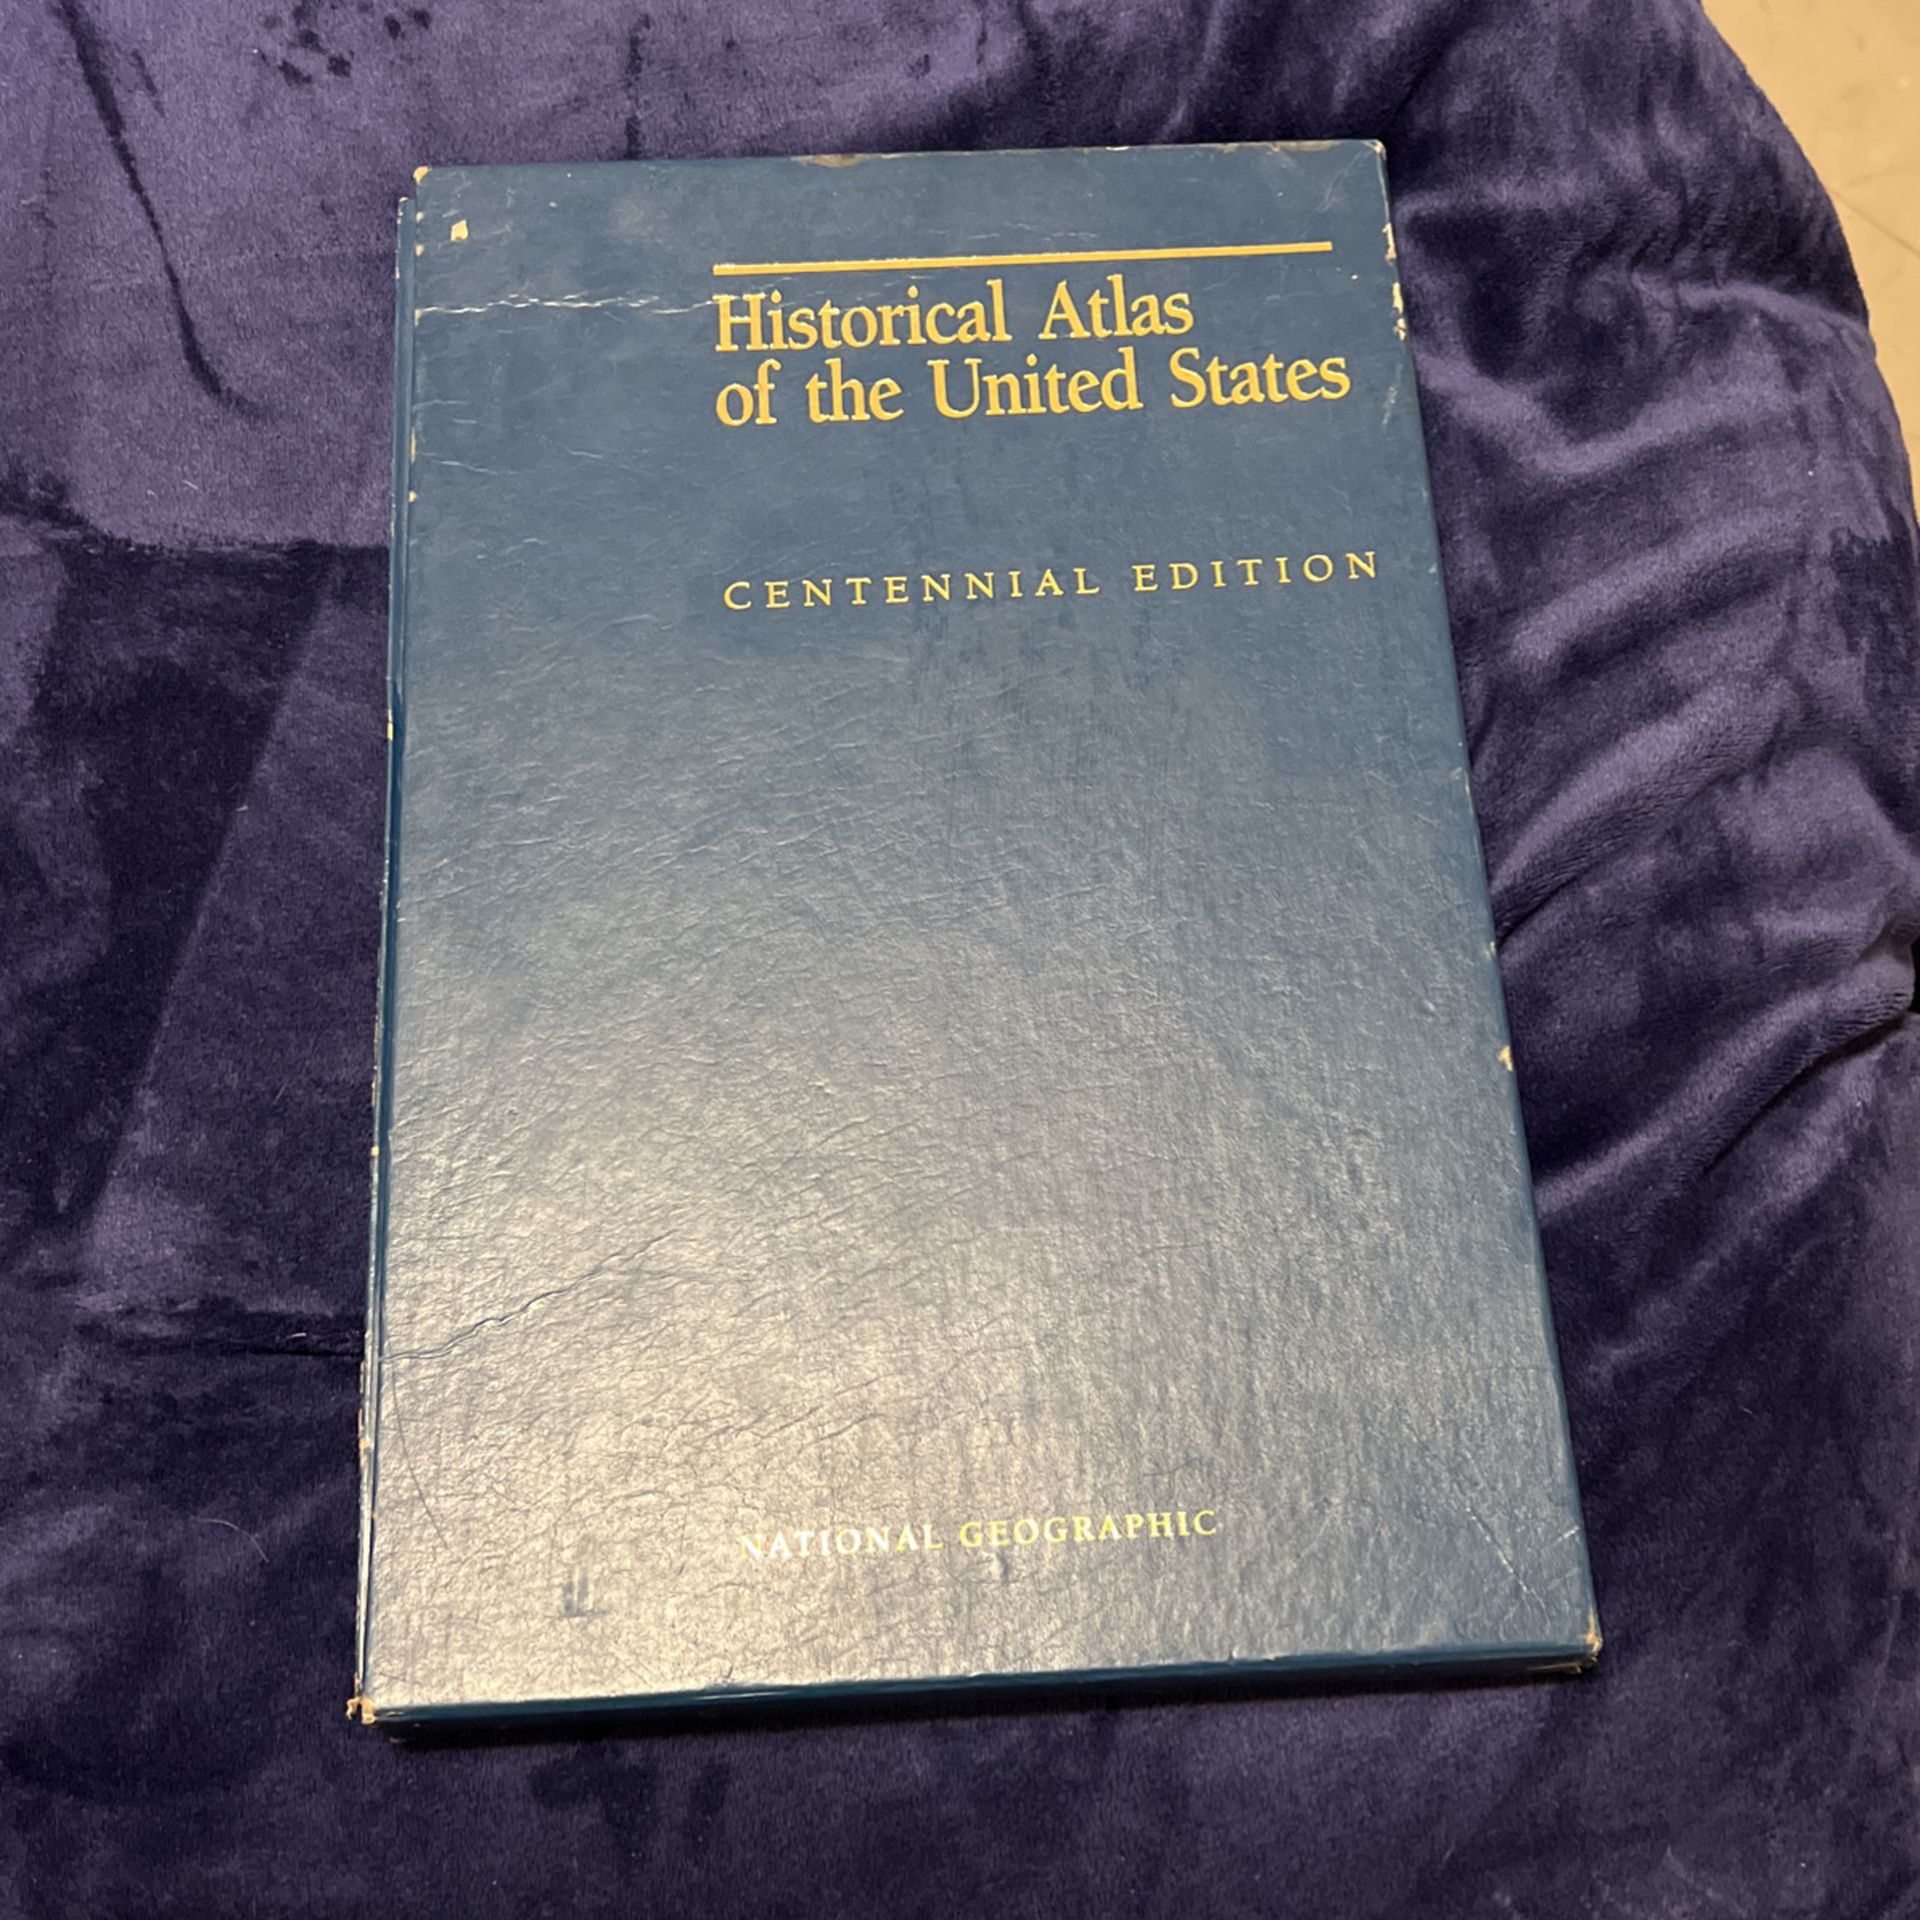 Historical atlas of the United States